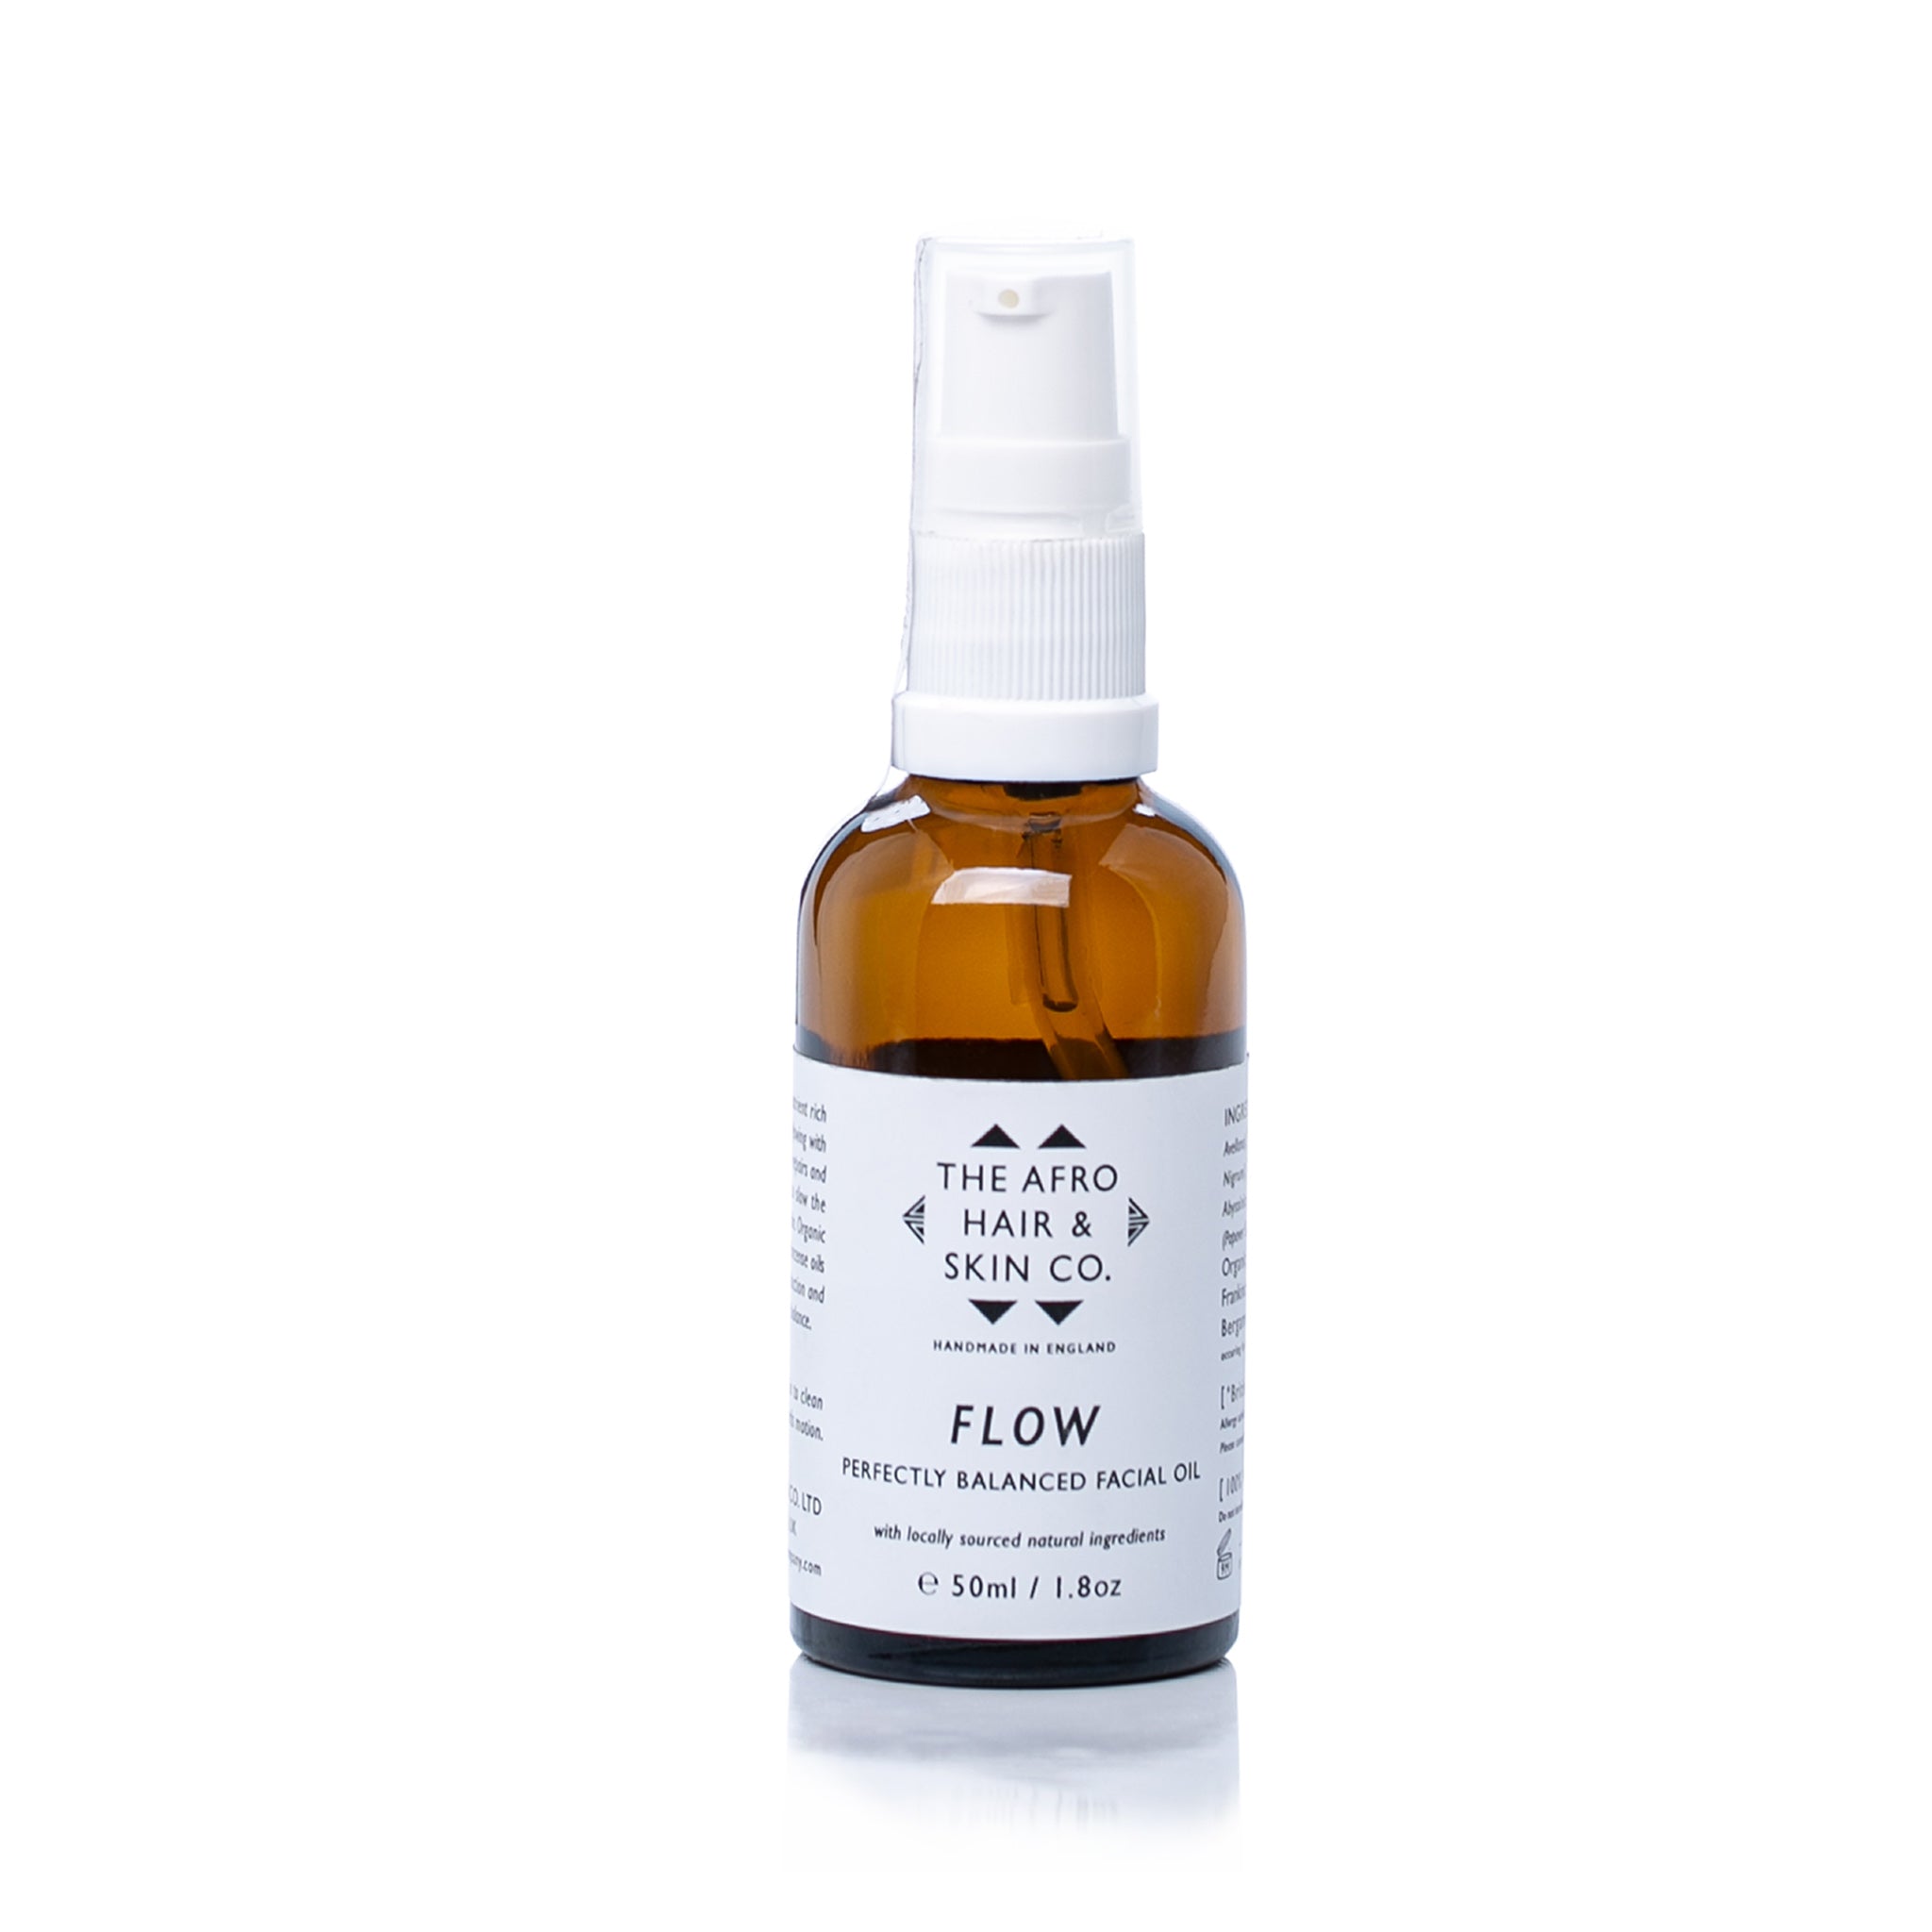 The Afro Hair and Skin Co. facial oil at Bracketts Beauty